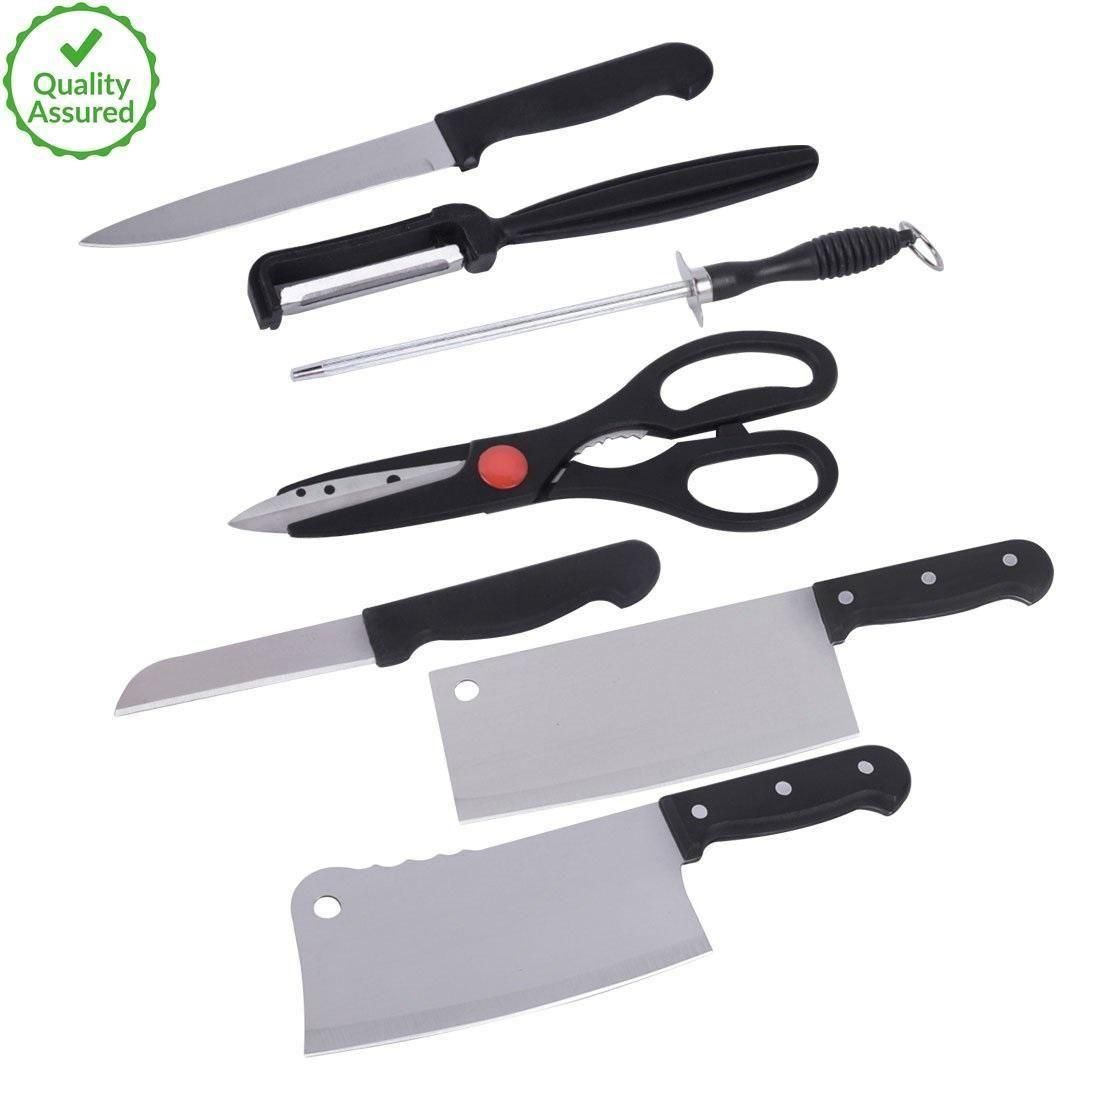 Knives Set-Stainless Steel 7 Pieces Kitchen Knives Set